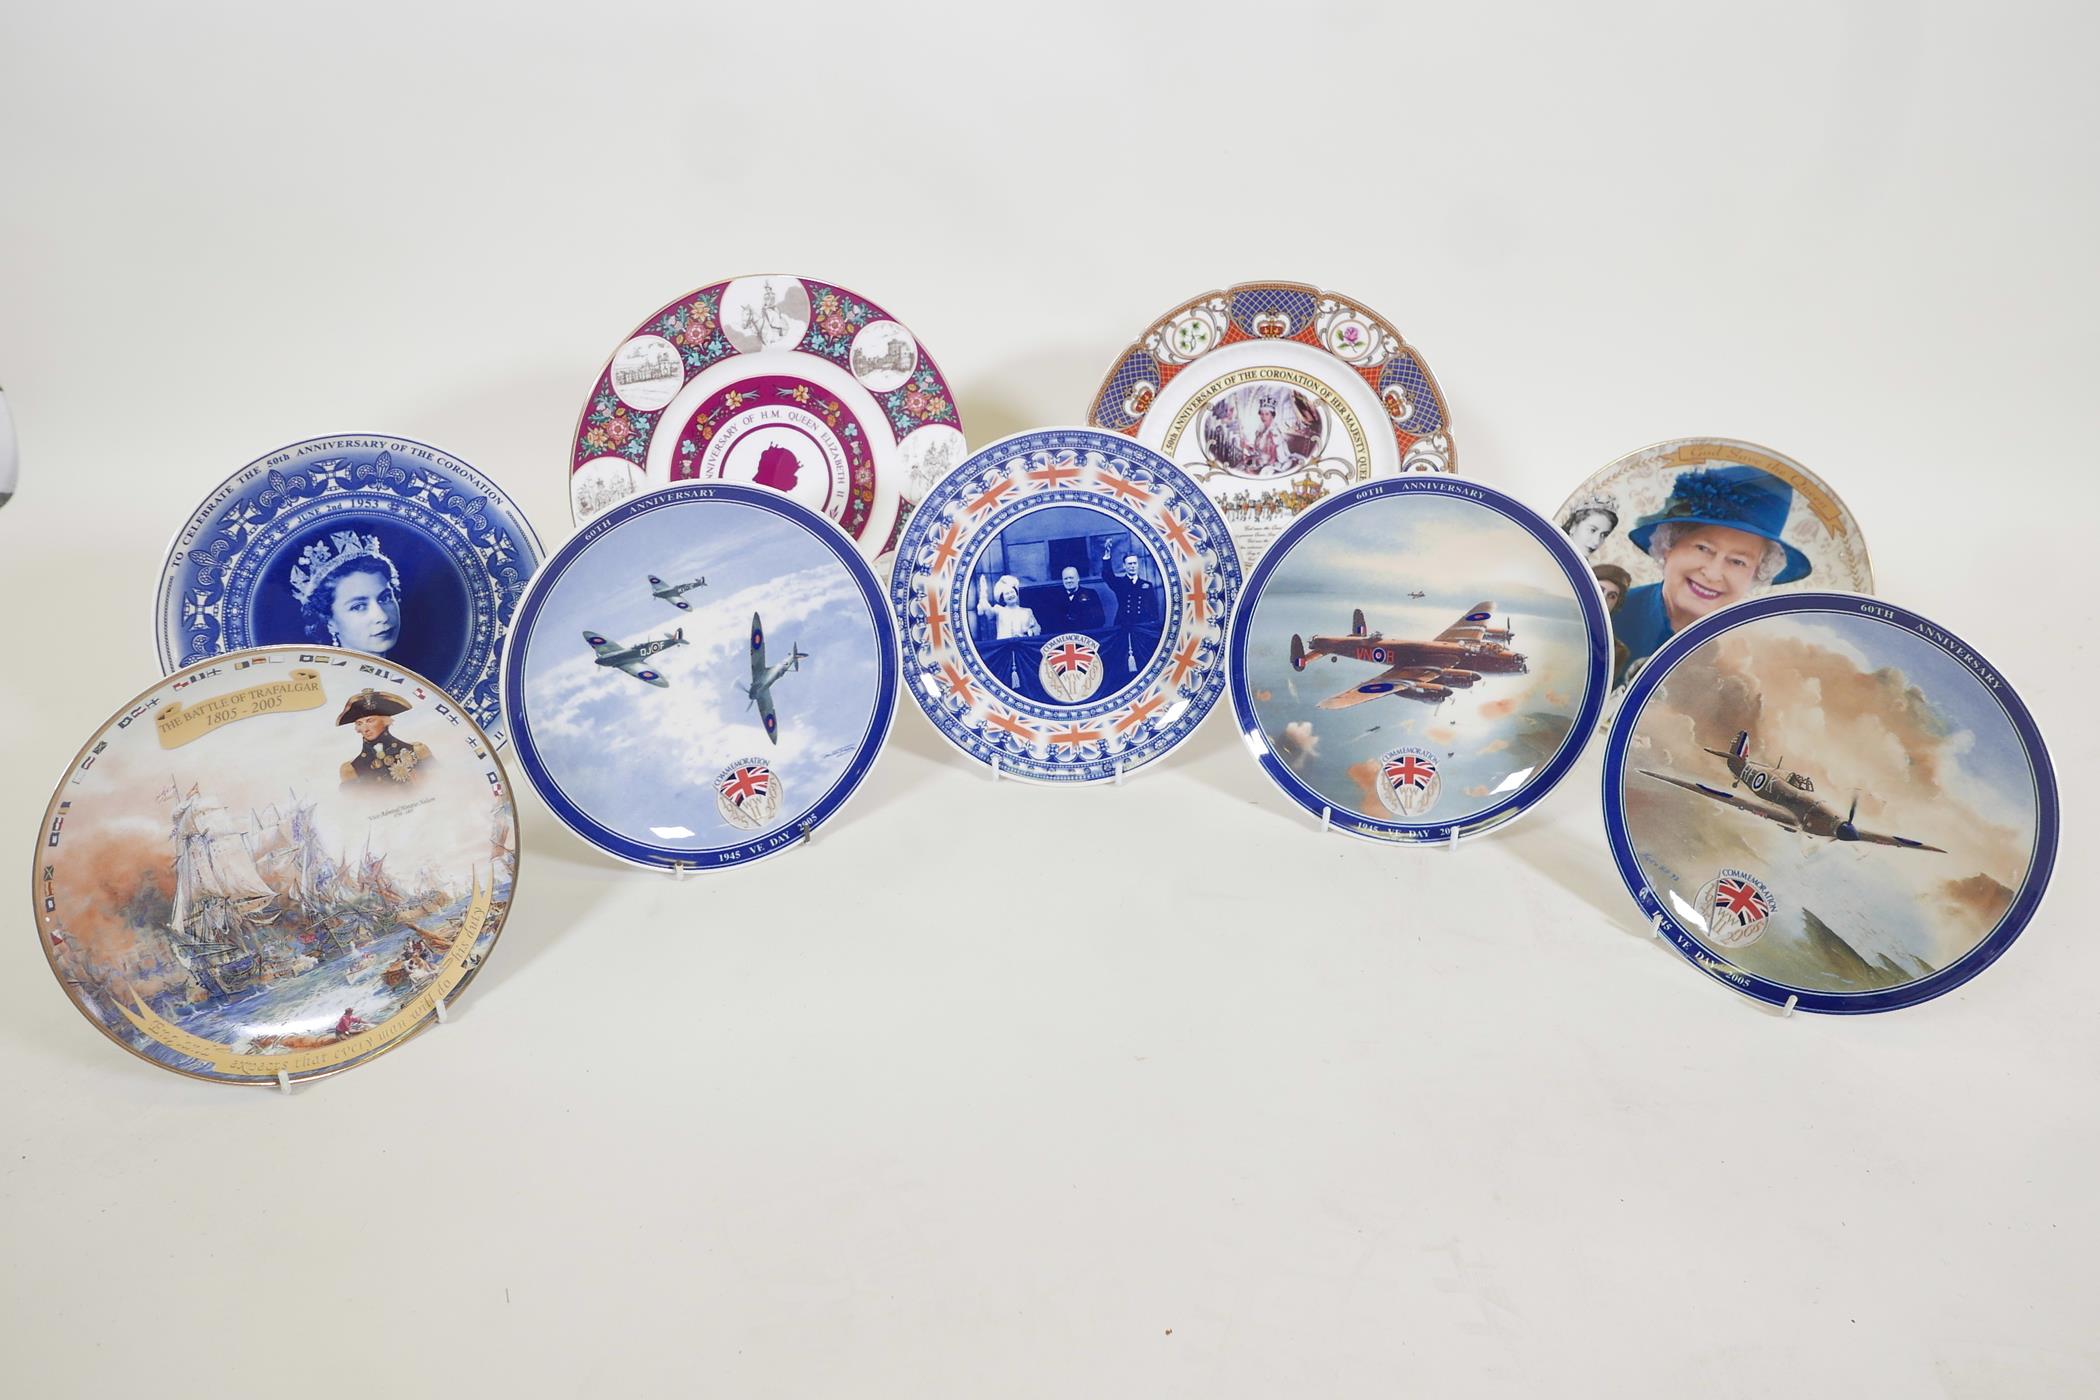 Numerous patriotic commemorative wall plates, including five Wedgwood special editions featuring